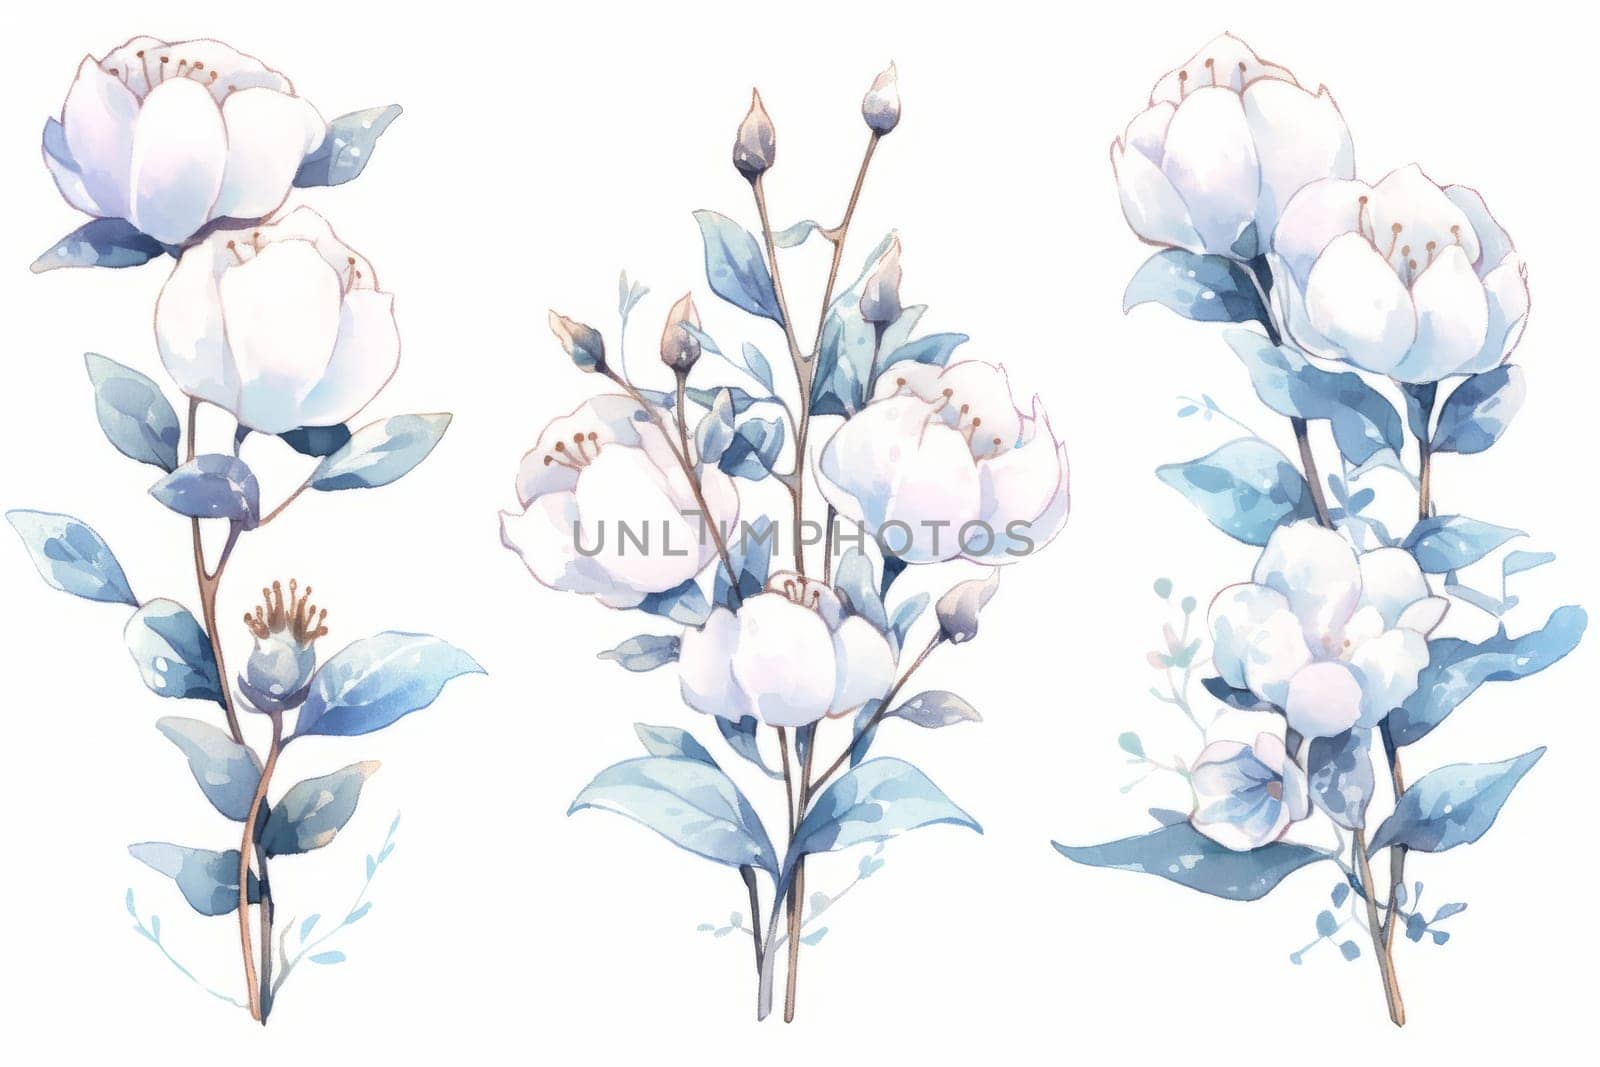 Cotton flowers hand drawn watercolor illustration. by Artsiom